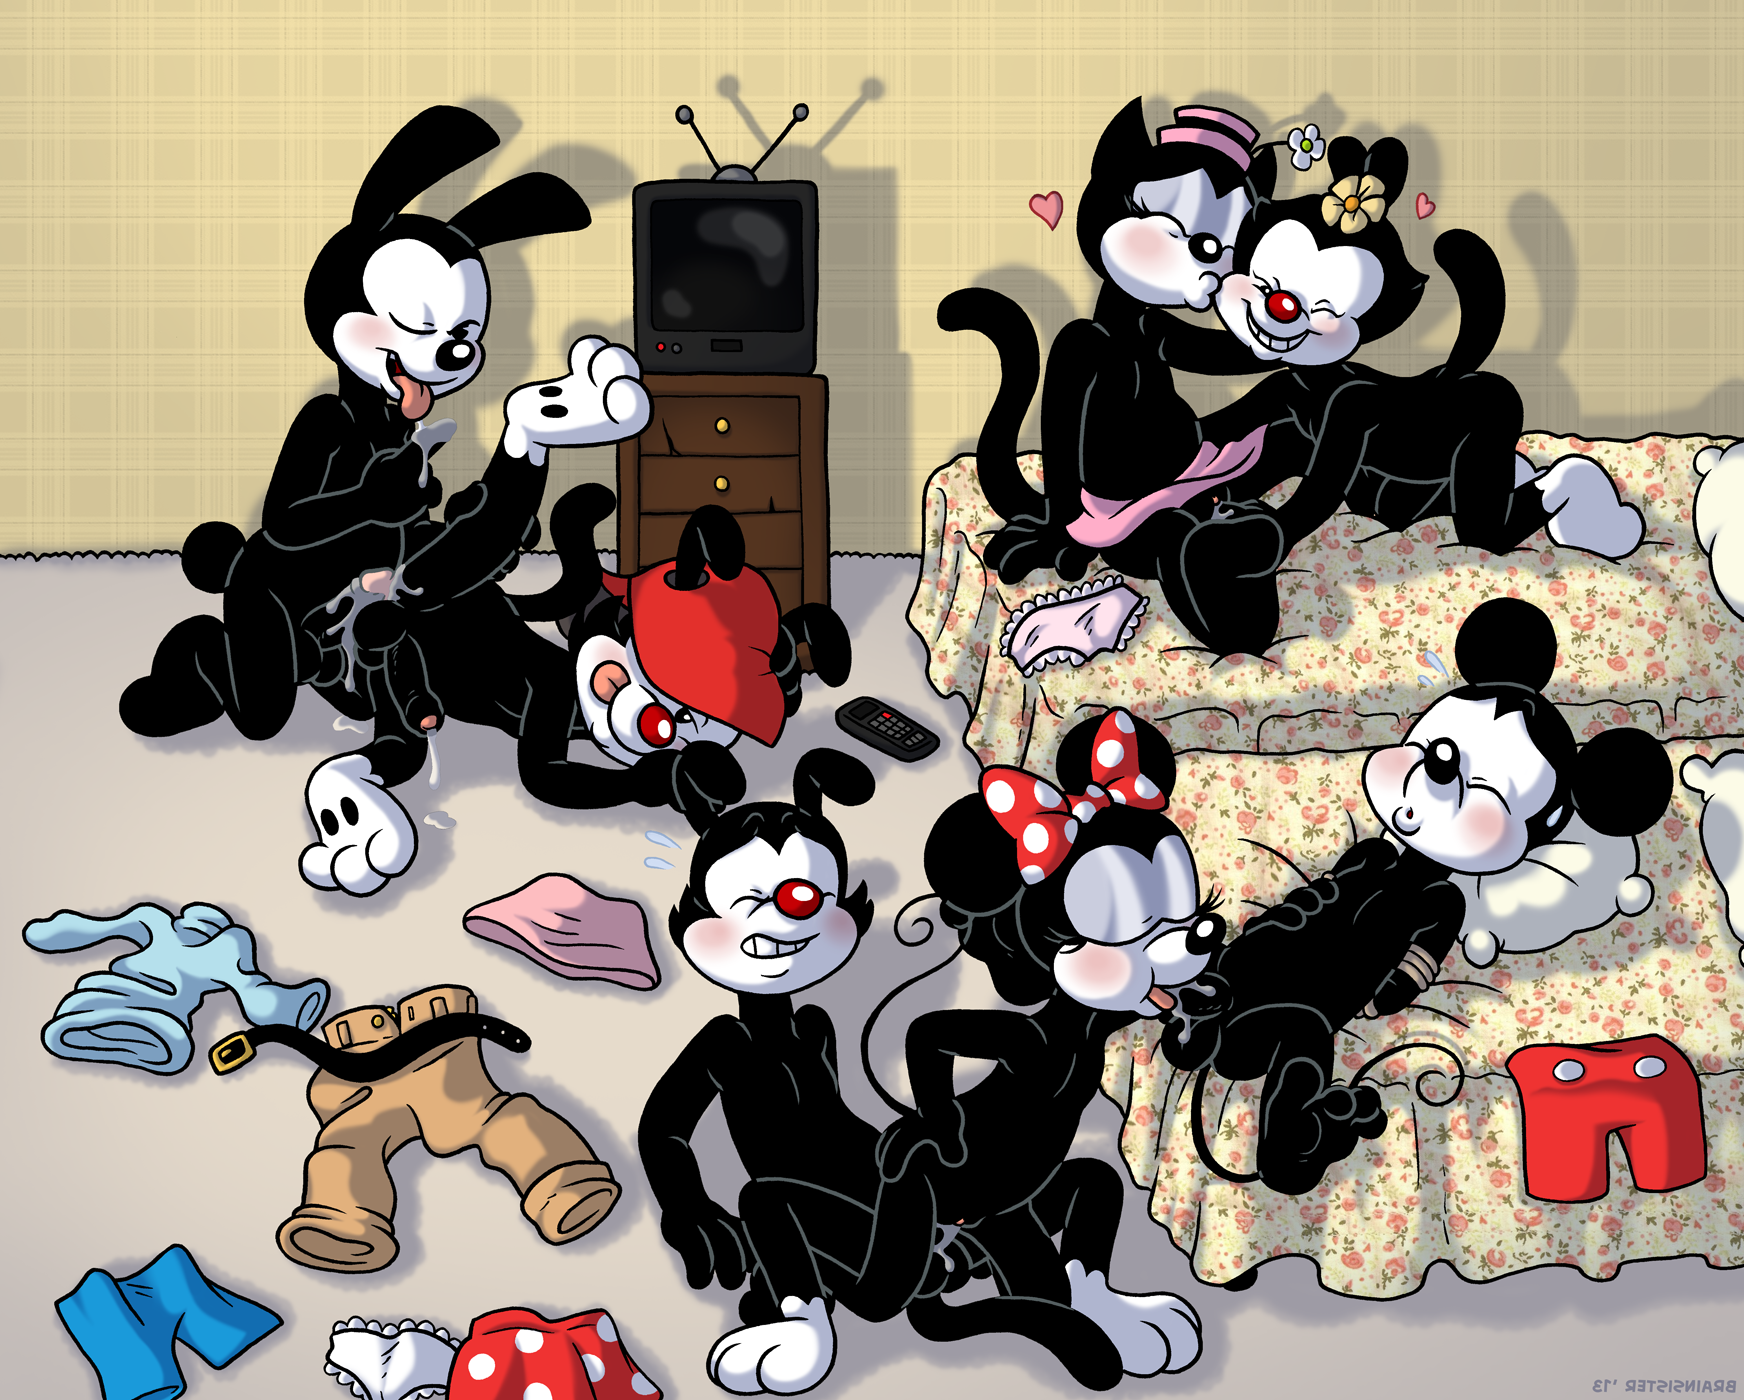 dot warner,mickey mouse,minnie mouse,ortensia,oswald,oswald the lucky rabbi...